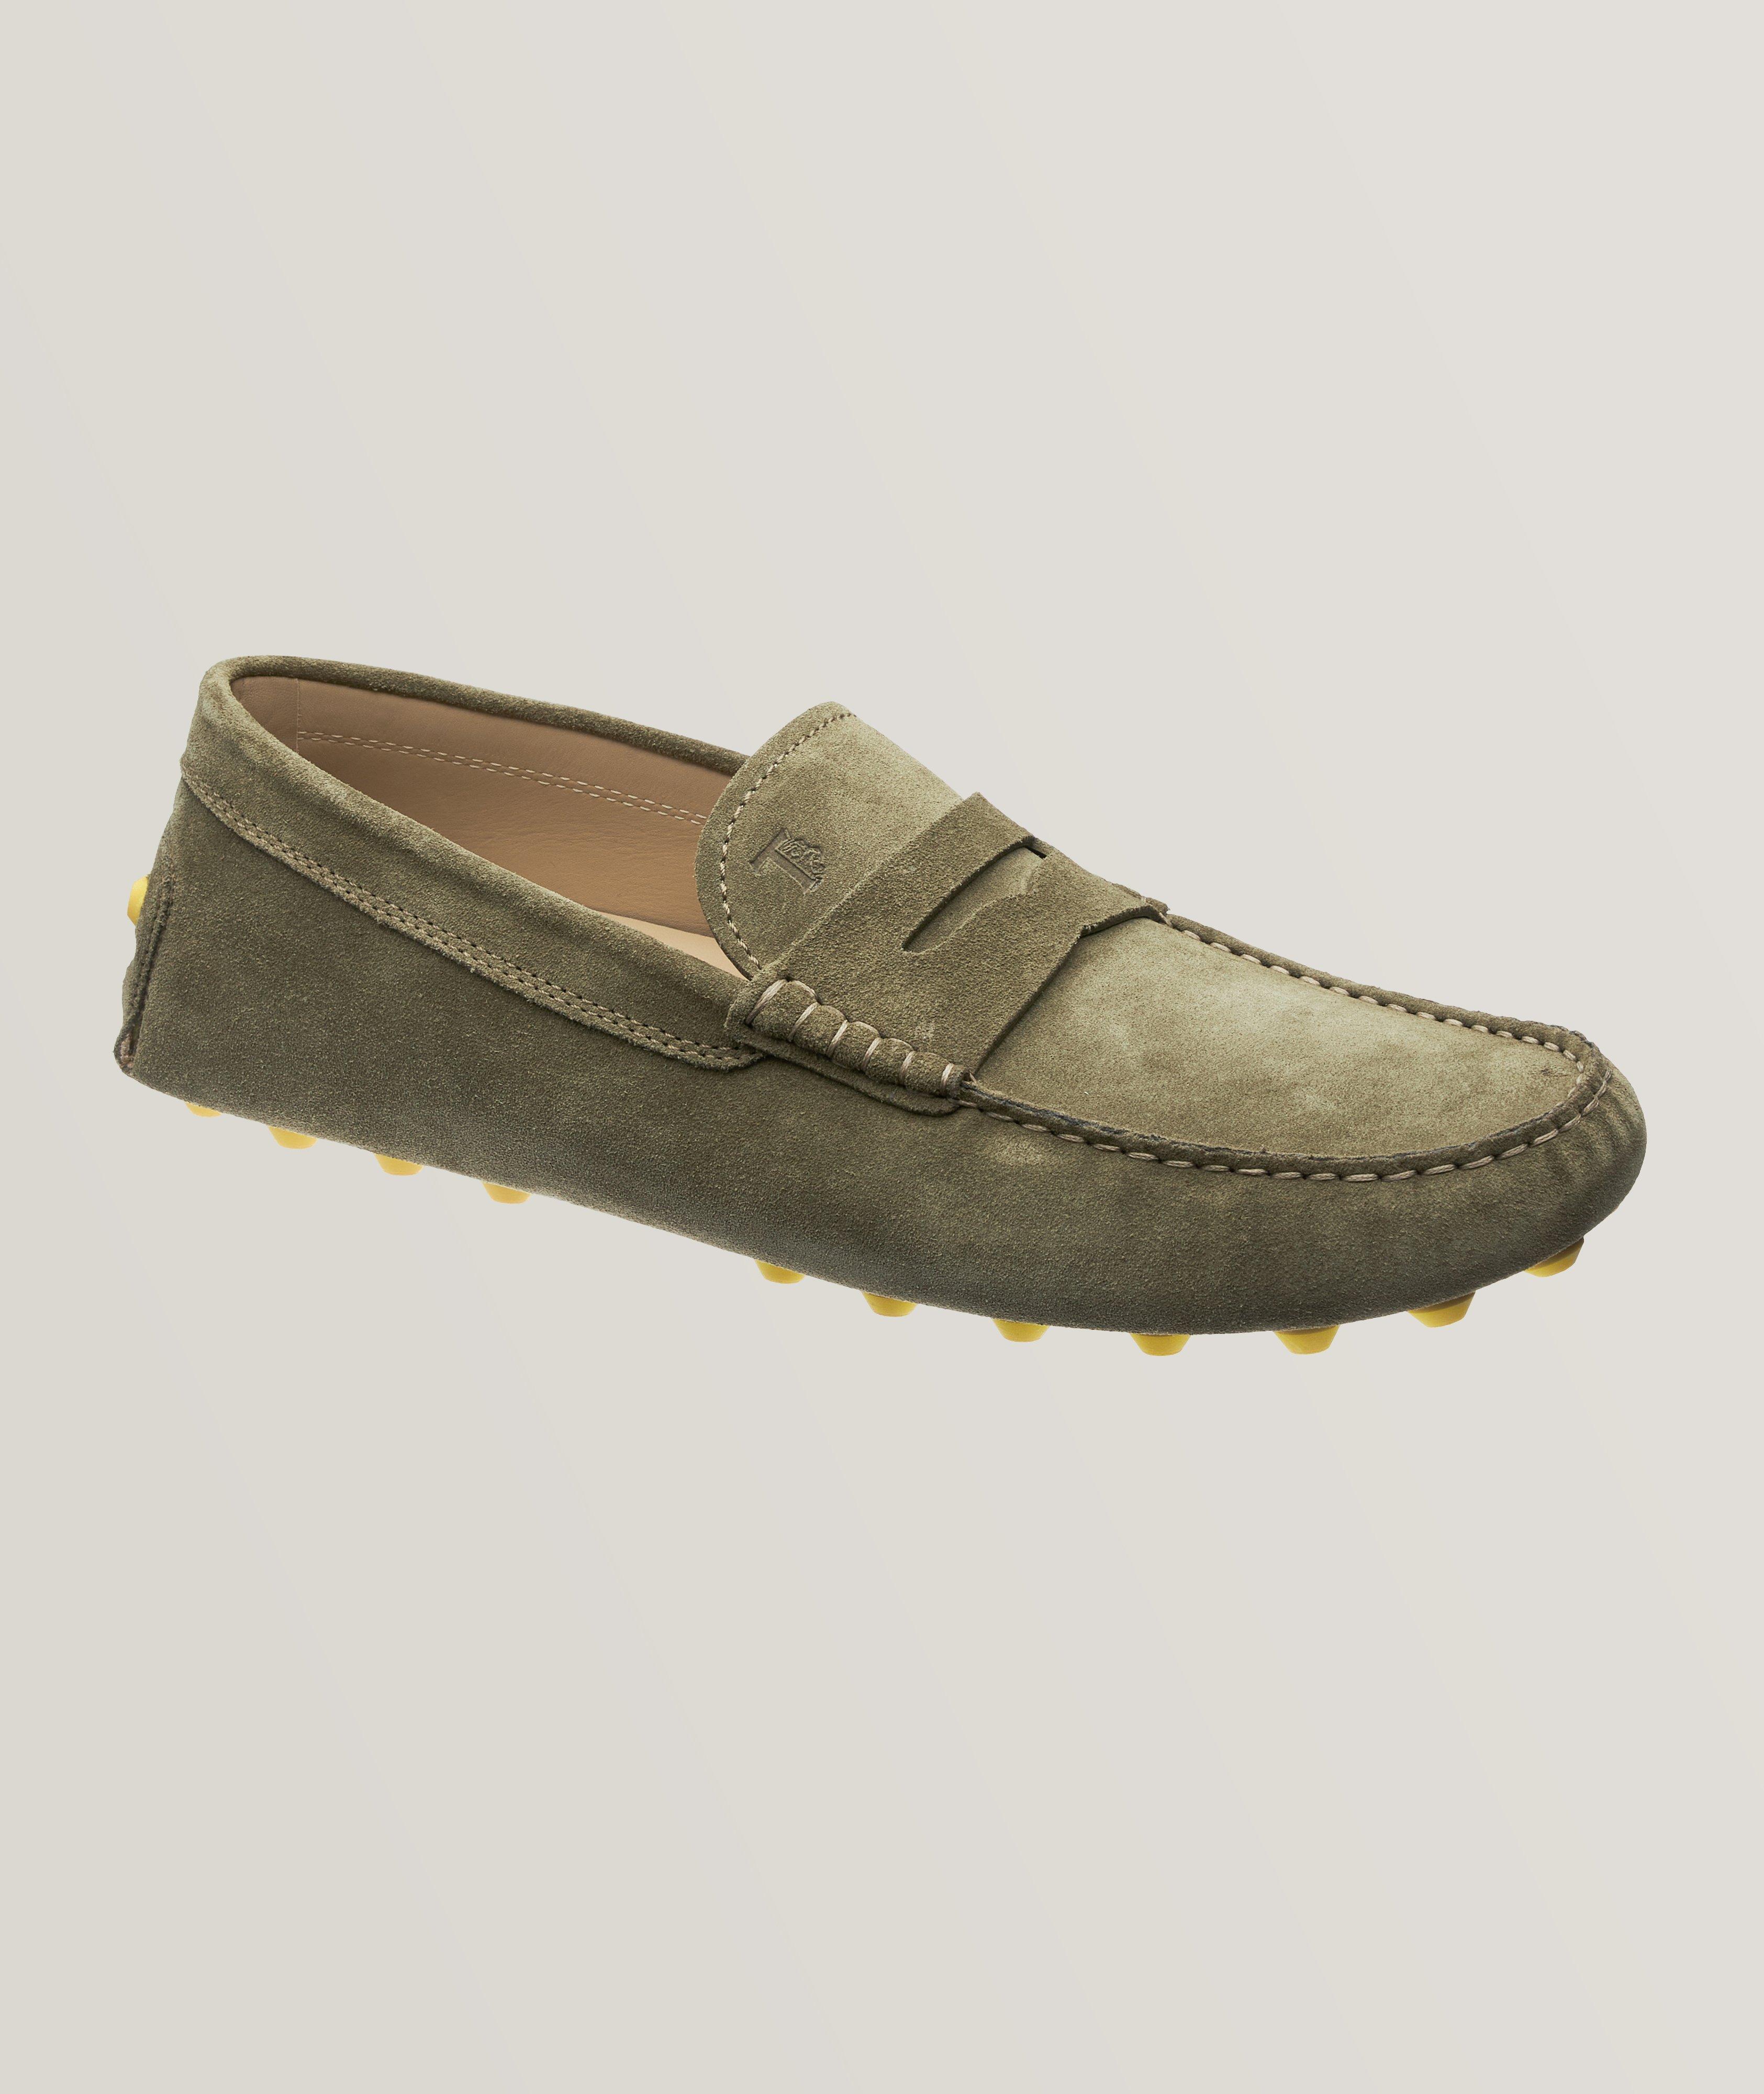 Gommino Suede Driving Shoes image 0